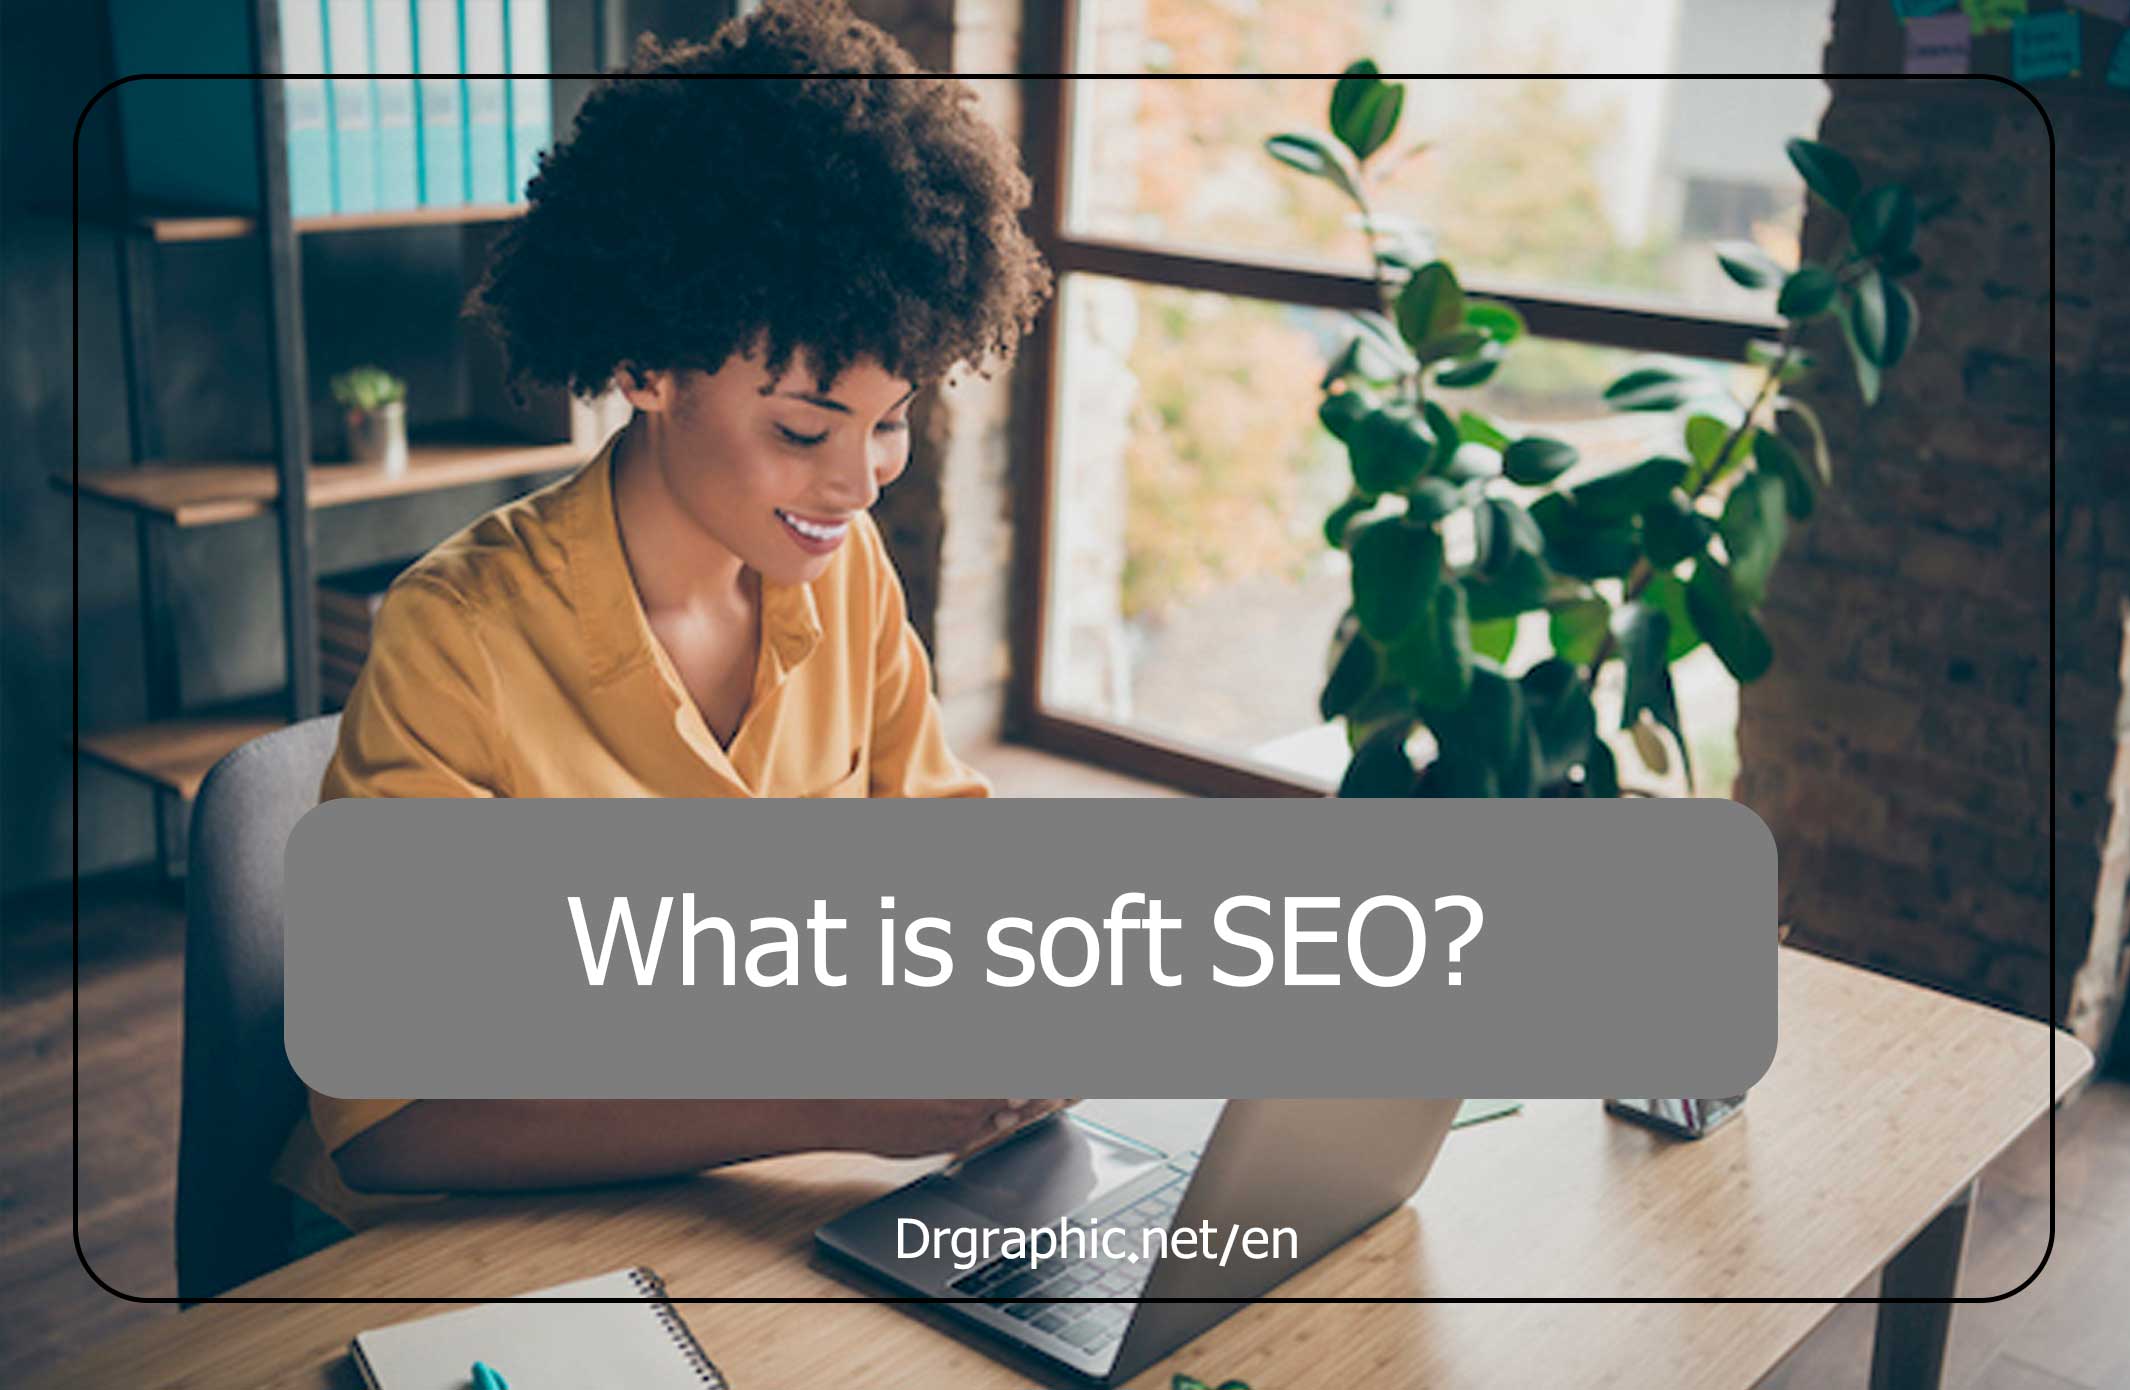 What is soft SEO?